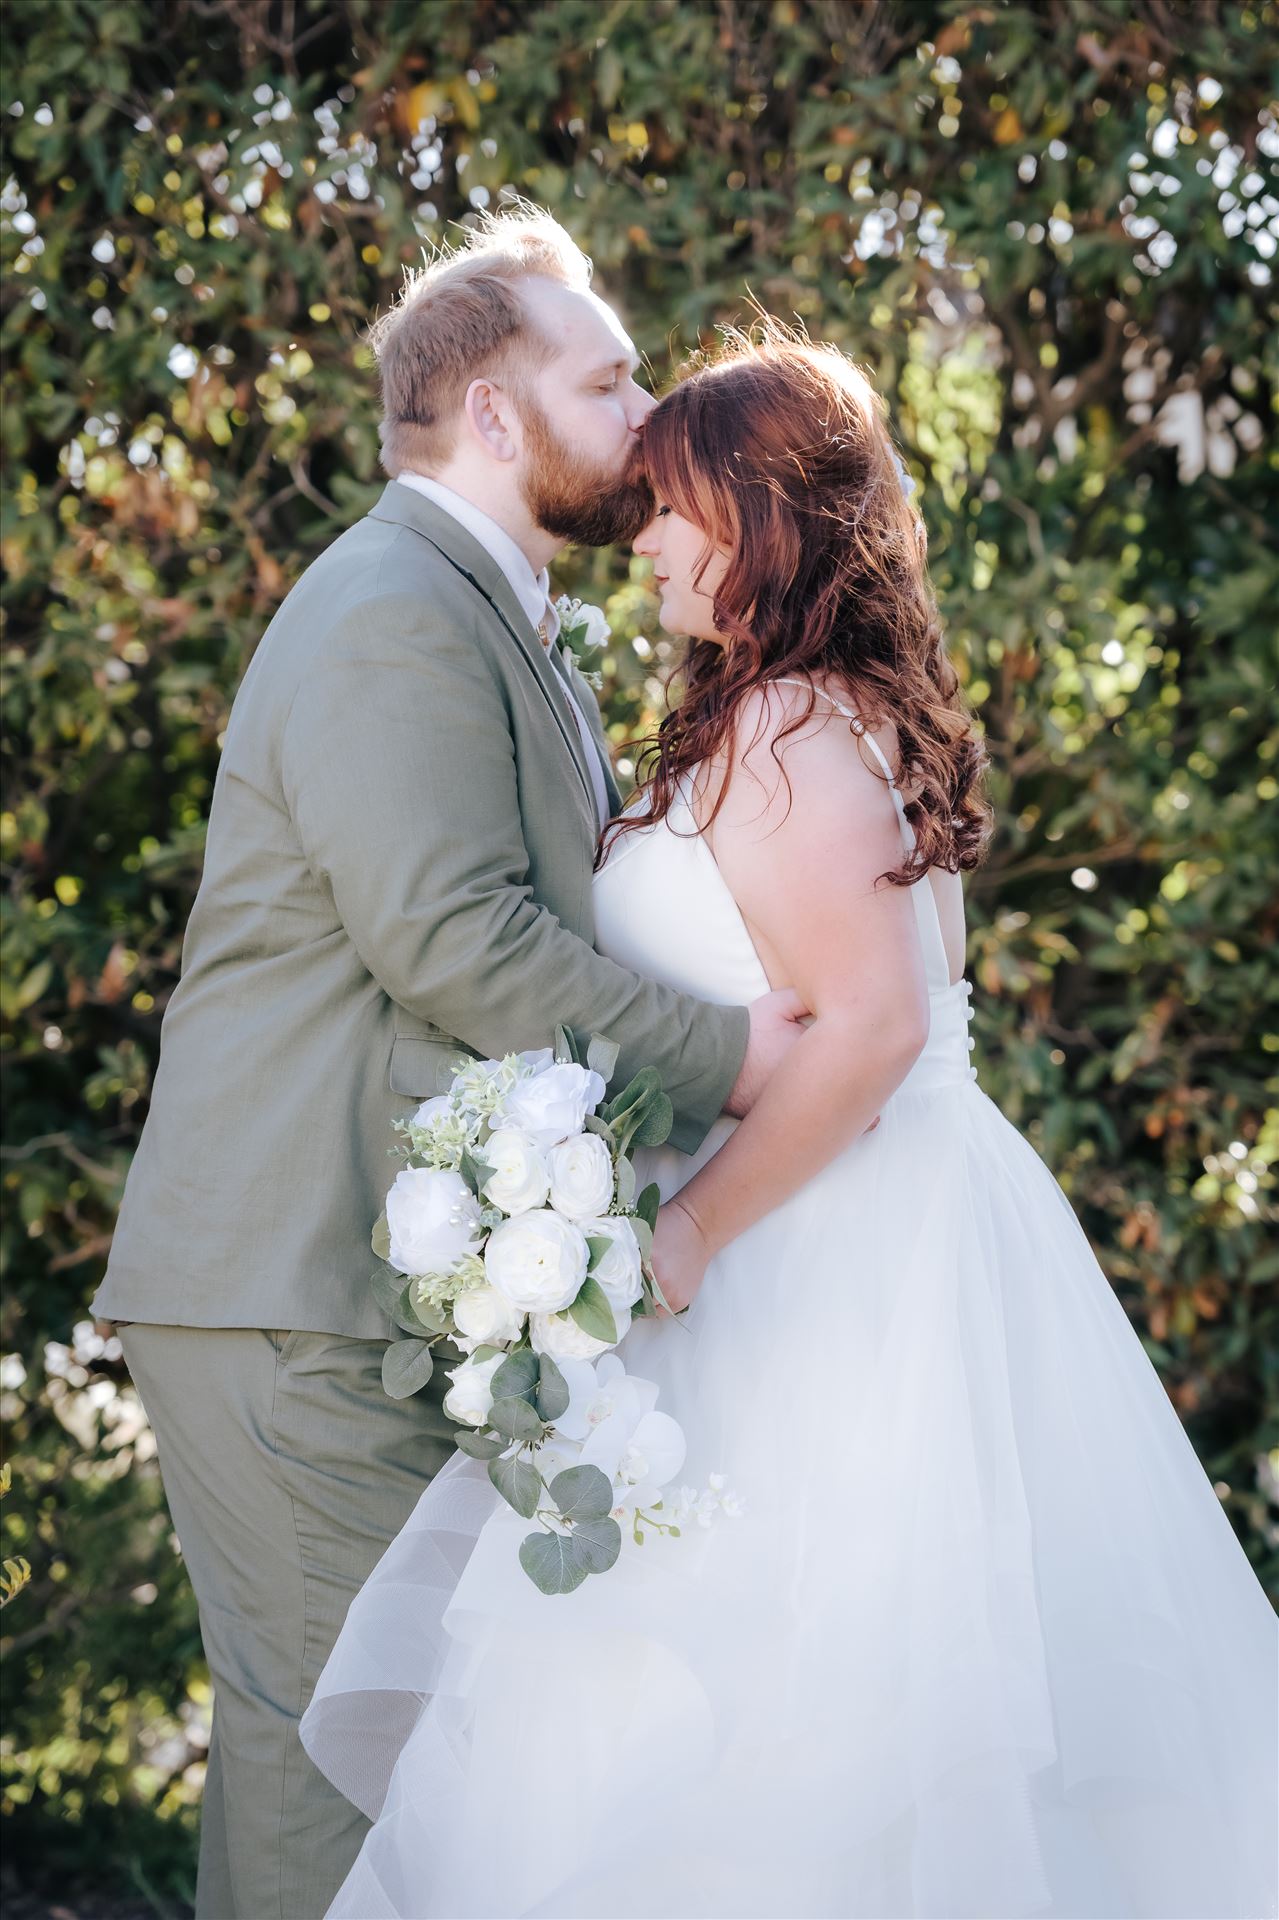 Final-.jpg - Sarah Williams of Mirror's Edge Photography, a San Luis Obispo County Wedding and Engagement Photographer, captures the amazing wedding of Justine and Reece at the Monday Club in San Luis Obispo California. Gorgeous Bride and Groom forehead kiss by Sarah Williams